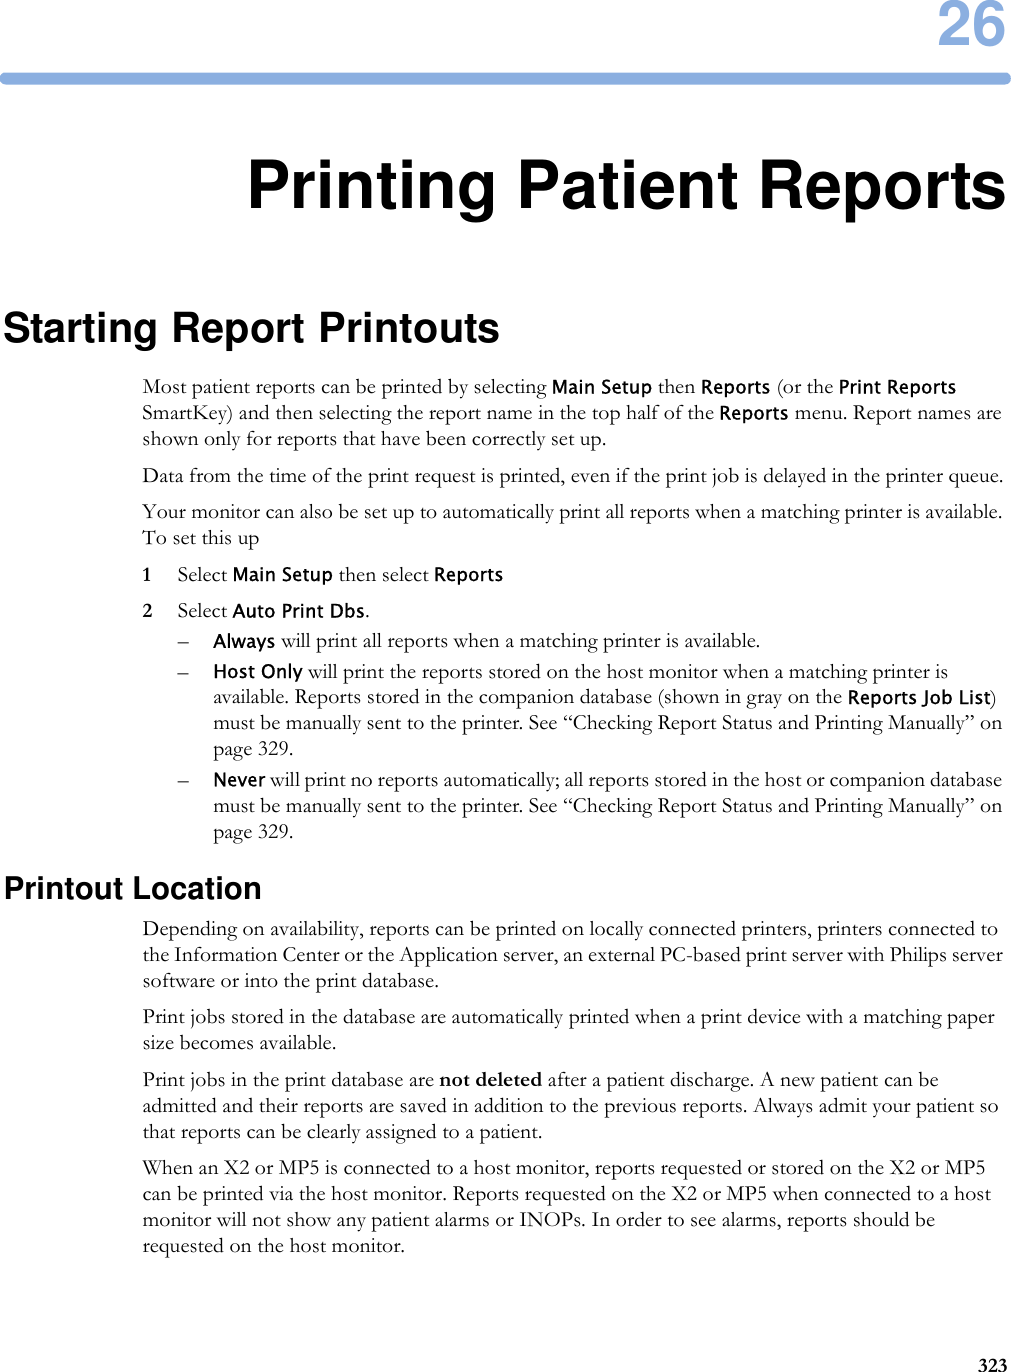 2632326Printing Patient ReportsStarting Report PrintoutsMost patient reports can be printed by selecting Main Setup then Reports (or the Print Reports SmartKey) and then selecting the report name in the top half of the Reports menu. Report names are shown only for reports that have been correctly set up.Data from the time of the print request is printed, even if the print job is delayed in the printer queue.Your monitor can also be set up to automatically print all reports when a matching printer is available. To set this up1Select Main Setup then select Reports2Select Auto Print Dbs.–Always will print all reports when a matching printer is available.–Host Only will print the reports stored on the host monitor when a matching printer is available. Reports stored in the companion database (shown in gray on the Reports Job List) must be manually sent to the printer. See “Checking Report Status and Printing Manually” on page 329.–Never will print no reports automatically; all reports stored in the host or companion database must be manually sent to the printer. See “Checking Report Status and Printing Manually” on page 329.Printout LocationDepending on availability, reports can be printed on locally connected printers, printers connected to the Information Center or the Application server, an external PC-based print server with Philips server software or into the print database. Print jobs stored in the database are automatically printed when a print device with a matching paper size becomes available.Print jobs in the print database are not deleted after a patient discharge. A new patient can be admitted and their reports are saved in addition to the previous reports. Always admit your patient so that reports can be clearly assigned to a patient.When an X2 or MP5 is connected to a host monitor, reports requested or stored on the X2 or MP5 can be printed via the host monitor. Reports requested on the X2 or MP5 when connected to a host monitor will not show any patient alarms or INOPs. In order to see alarms, reports should be requested on the host monitor.